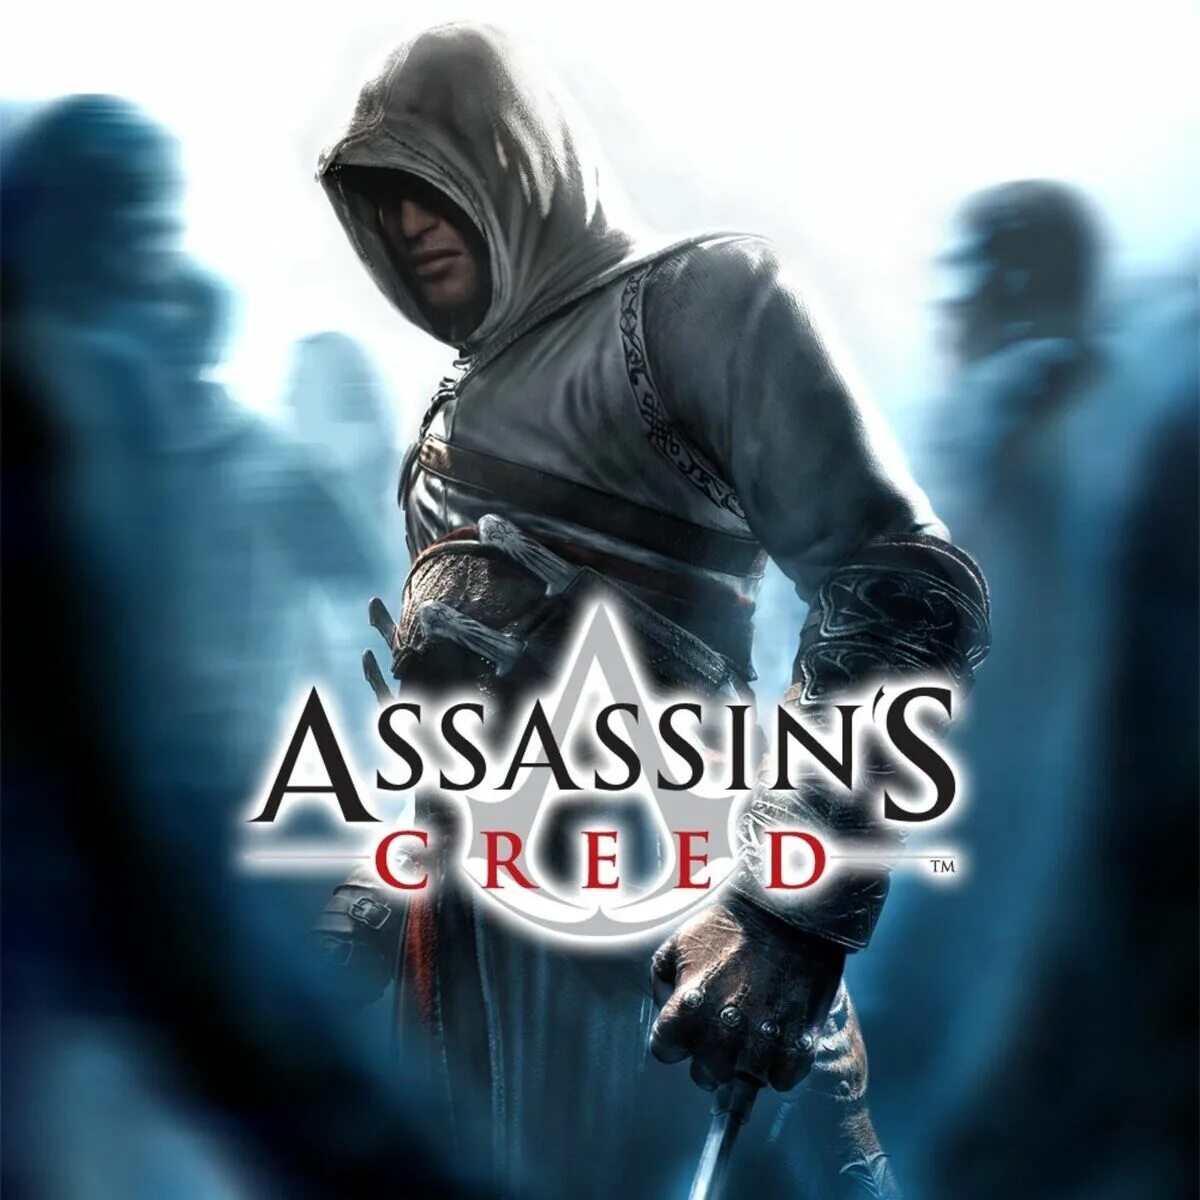 Assassin s Creed. Assassin's Creed 1 обложка. Assassin's Creed 2007 обложка. Ассасин Крид 1 обложка. Assassin's creed soundtrack